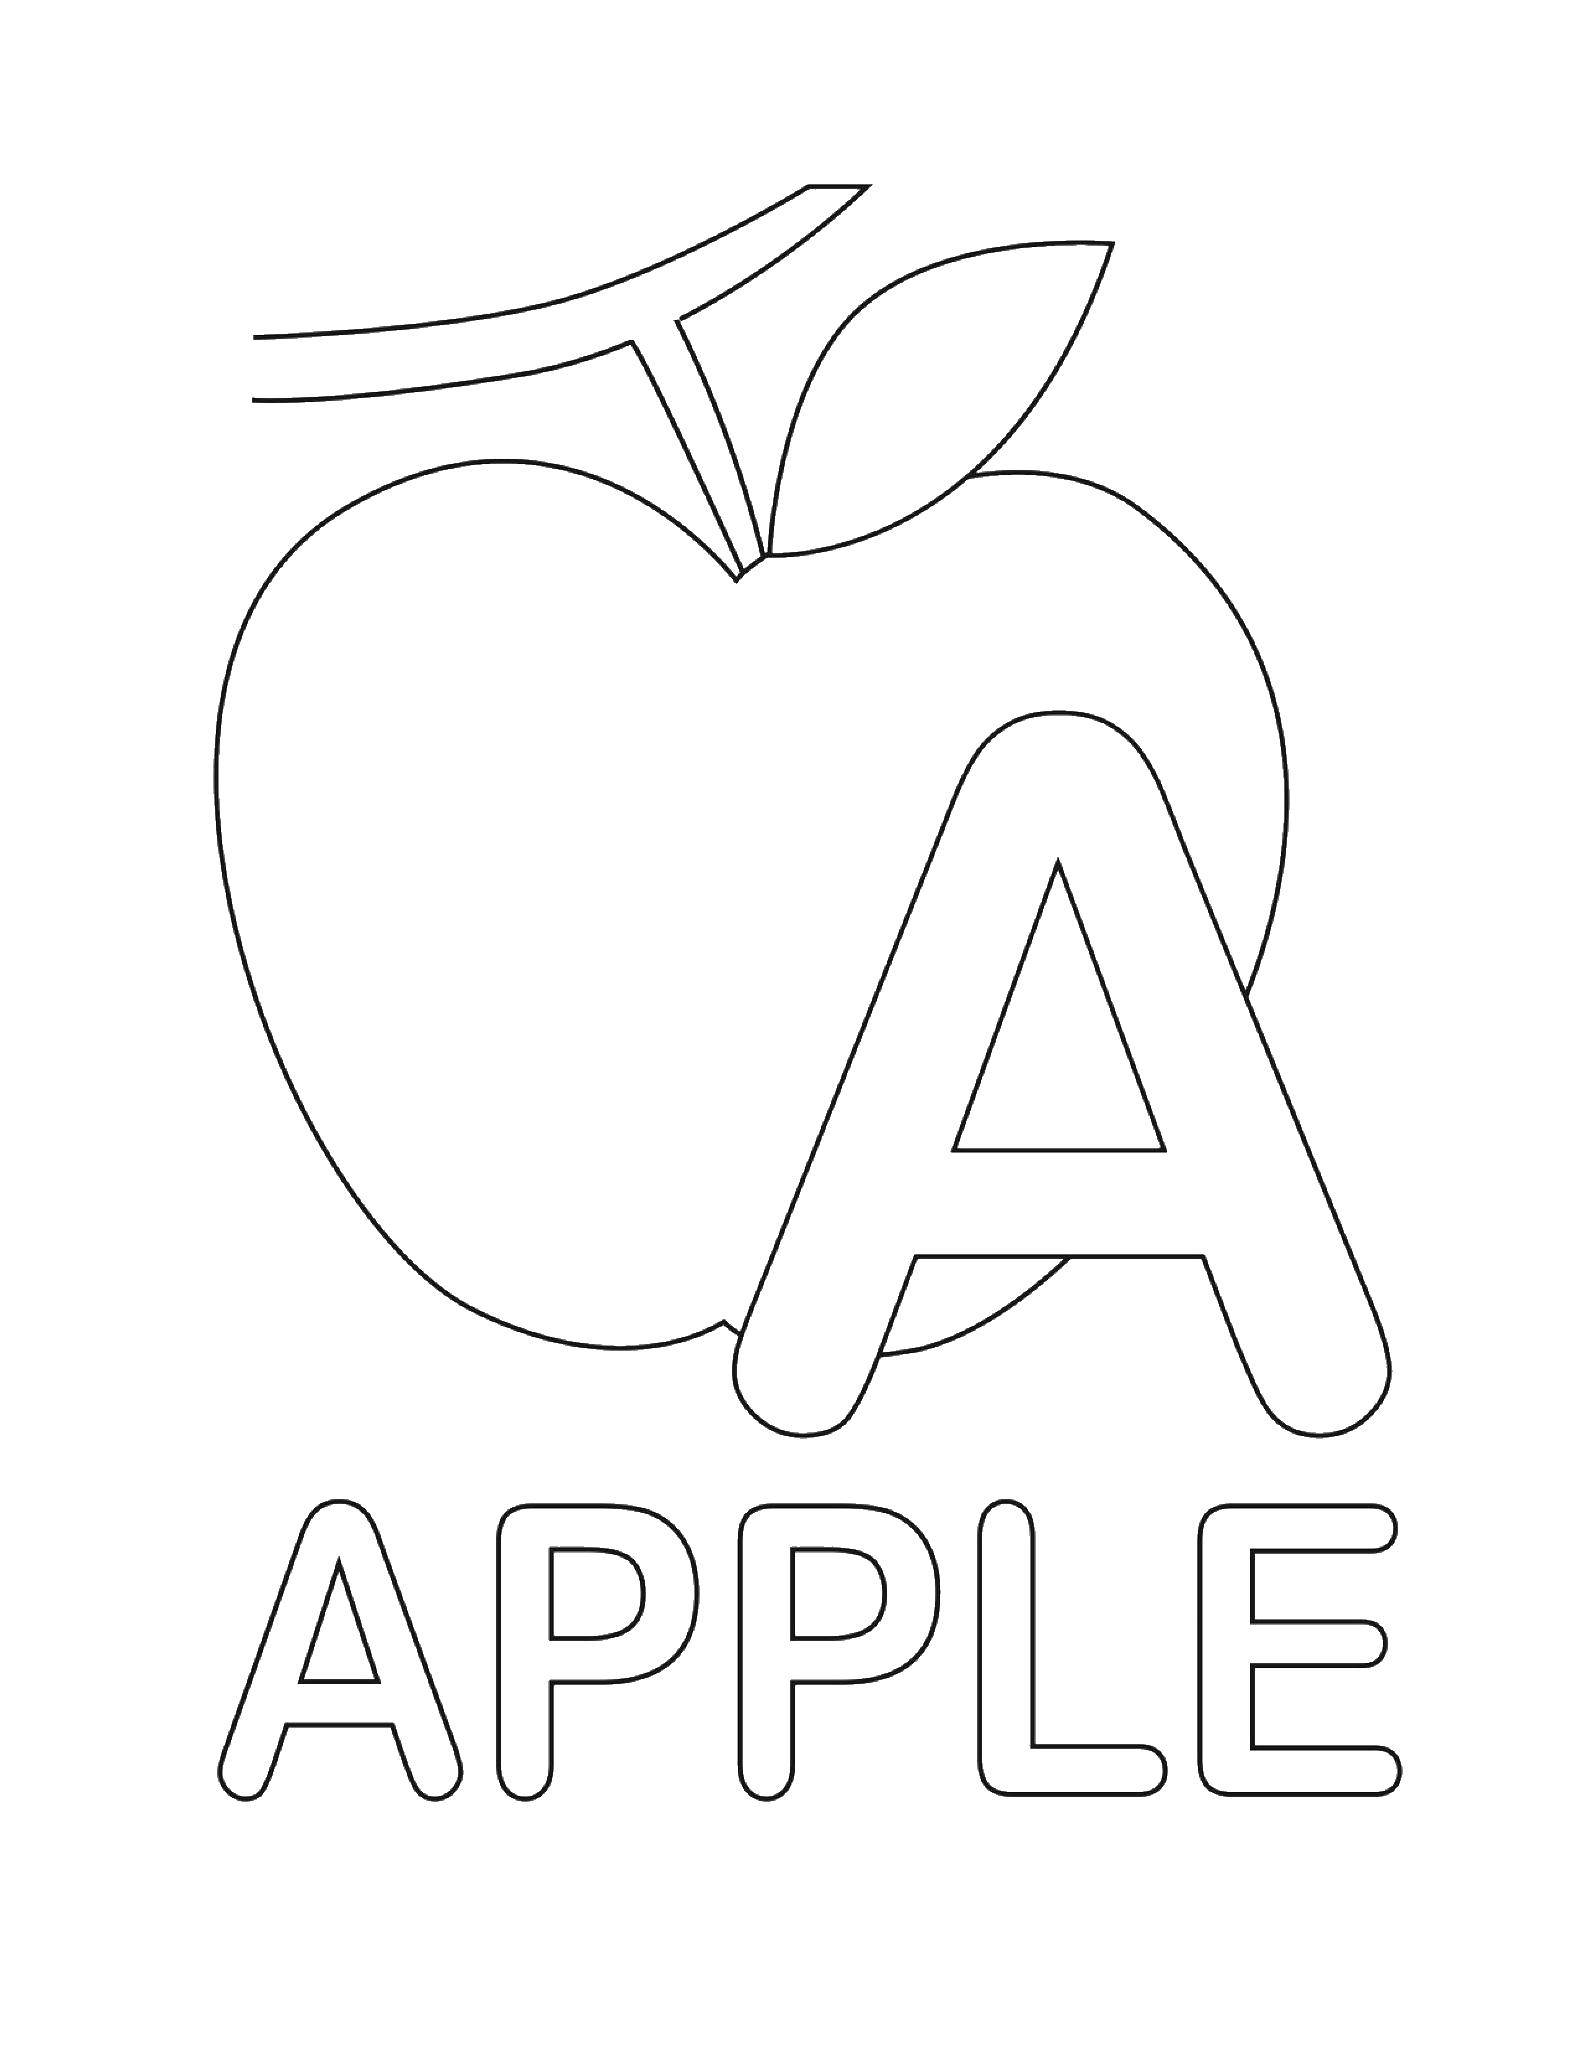 Coloring I Apple. Category English words. Tags:  English fruit. berries.